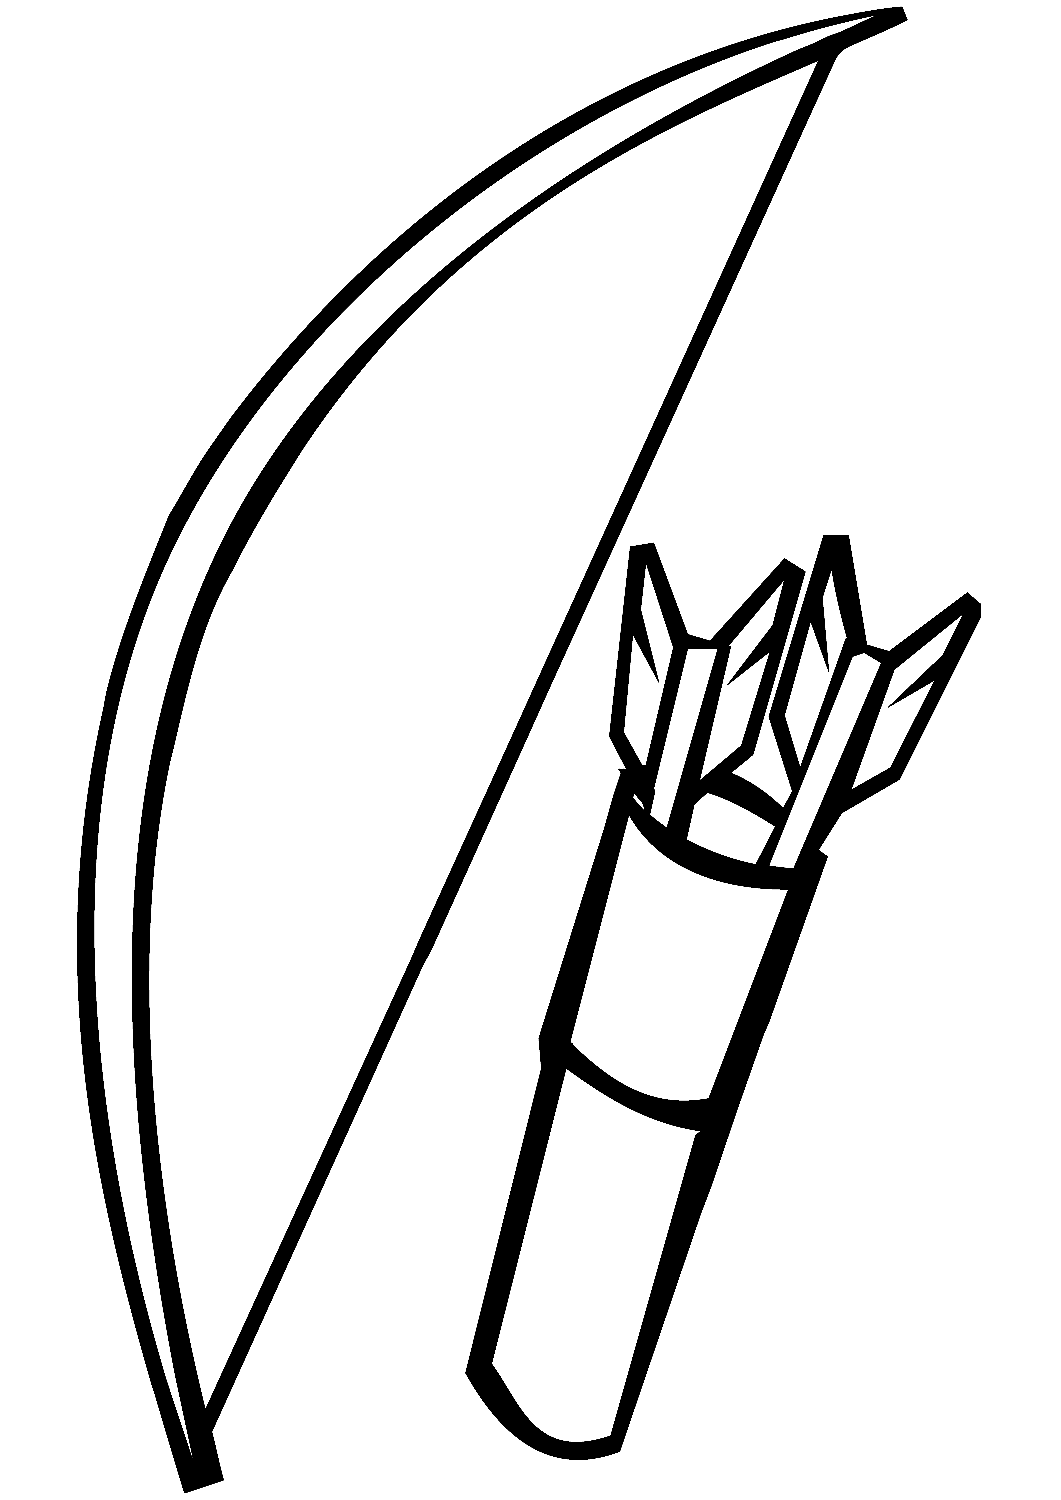 Bow and Arrows Coloring Page